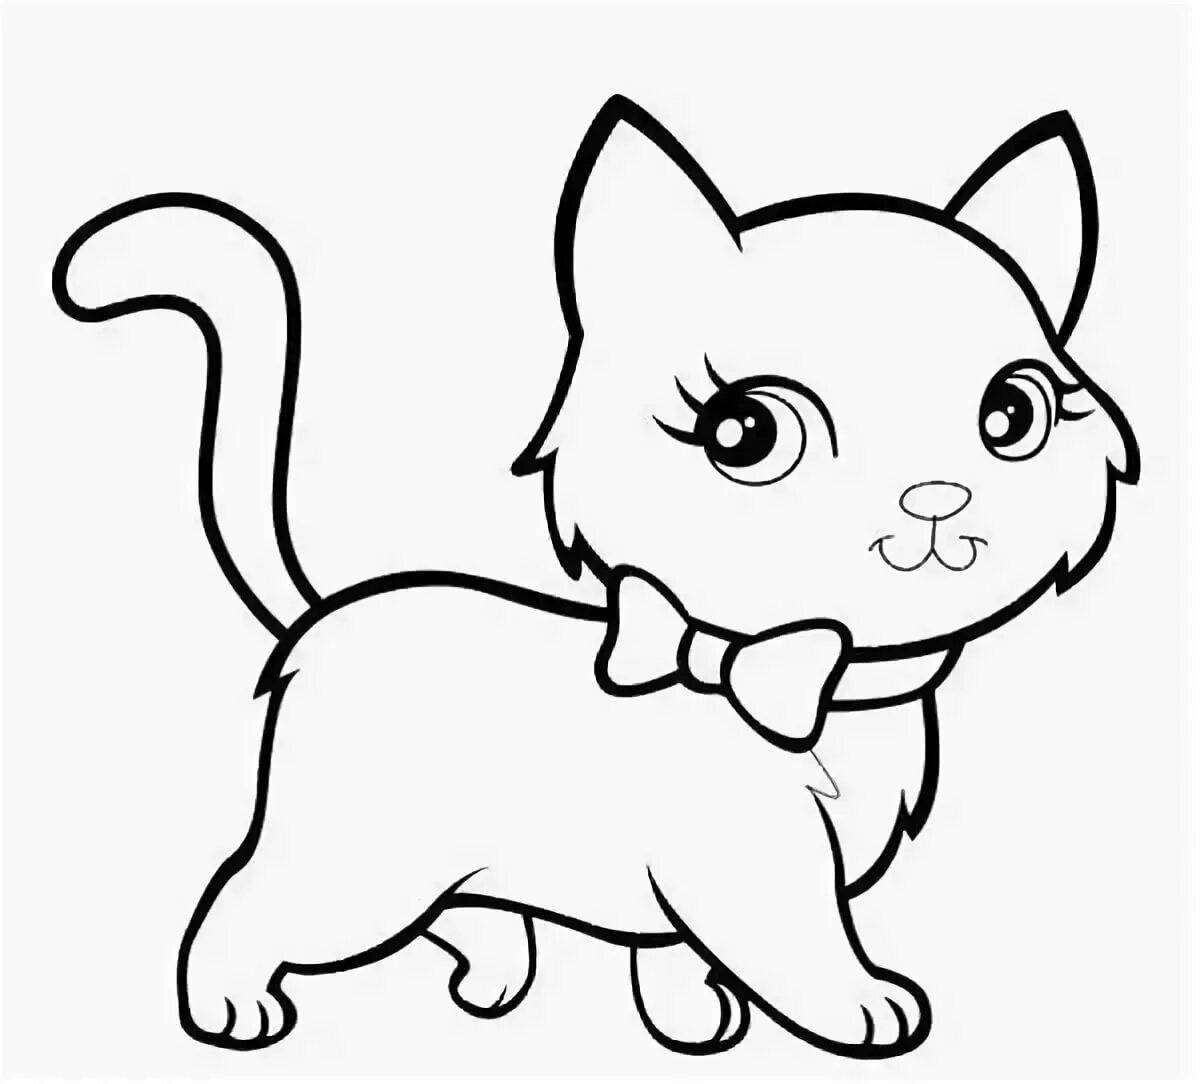 Coloring book shining mrr meow